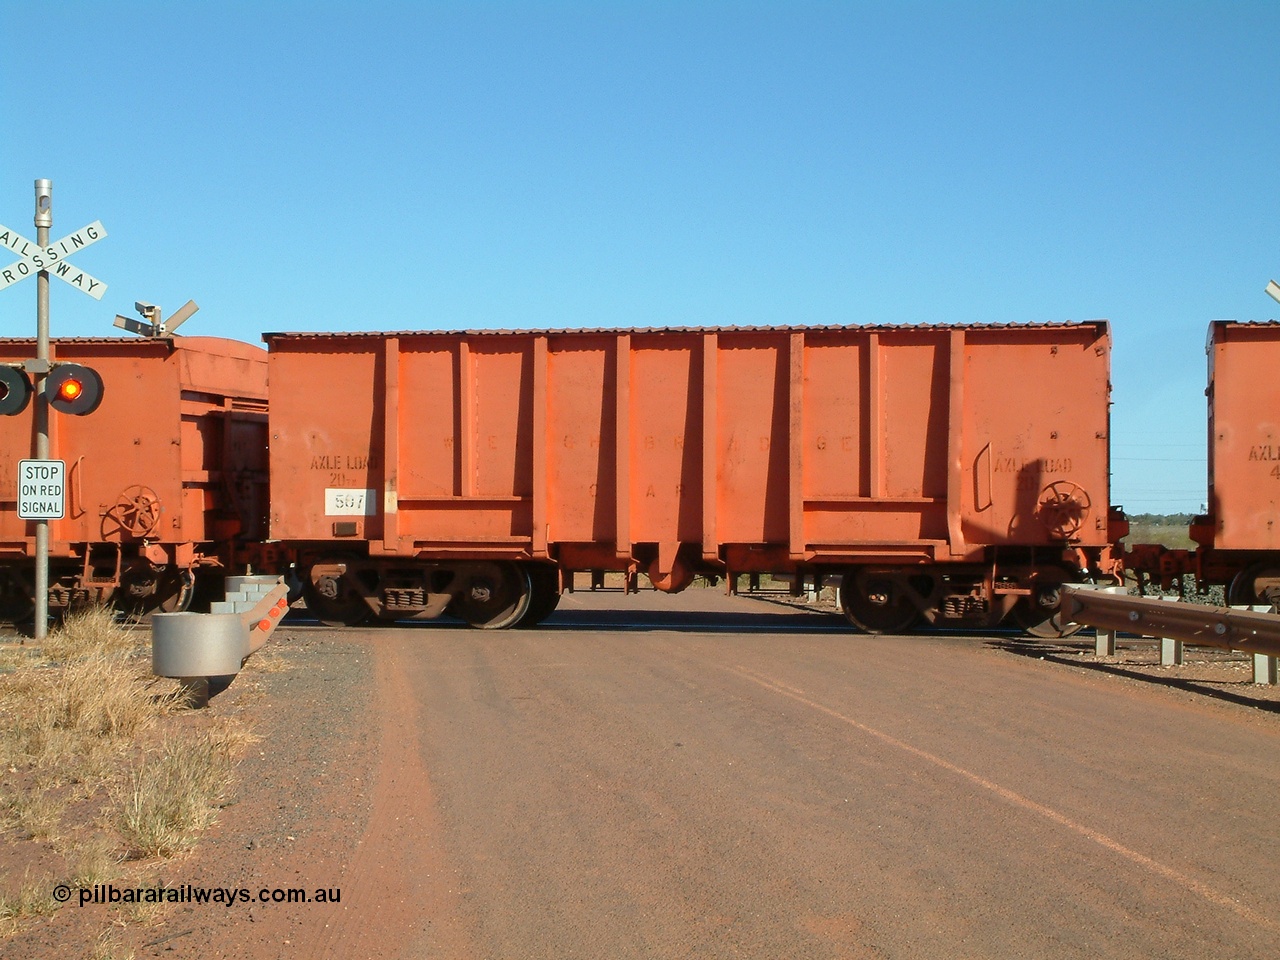 040806 091212
Goldsworthy Junction, weighbridge test waggon 507, originally built by Magor USA and ex Oroville Dam, converted by Mt Newman Mining into a 20 ton axle load test waggon.
